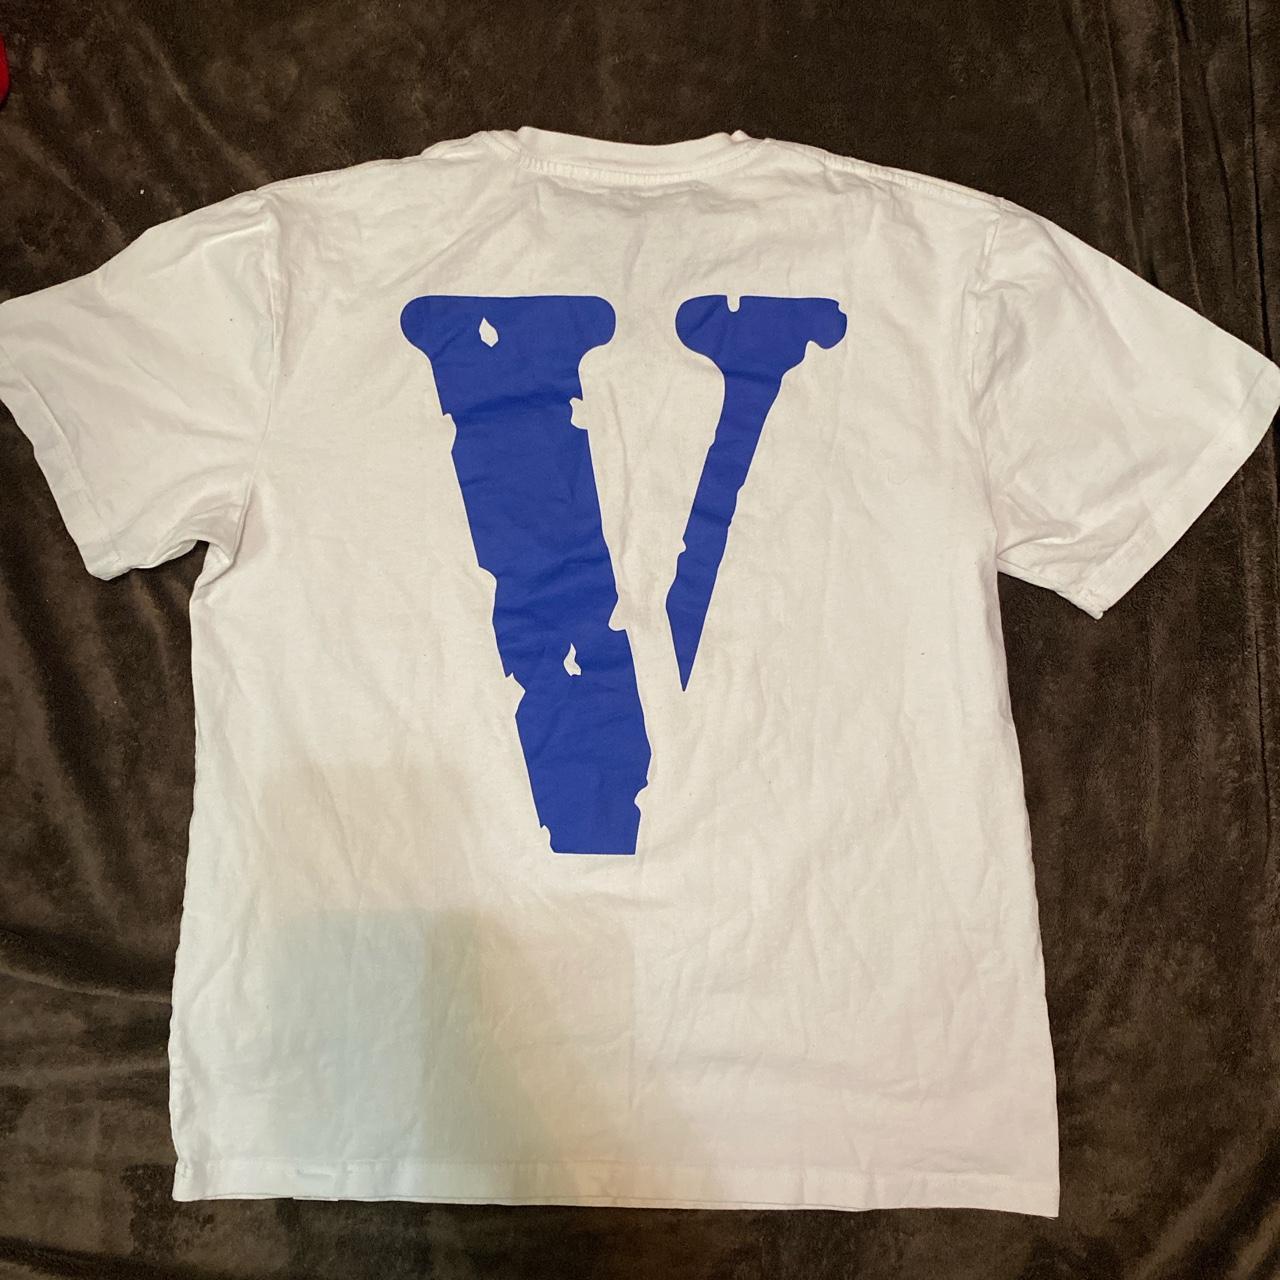 vlone, vlone friends tee, used sized XL, white and...